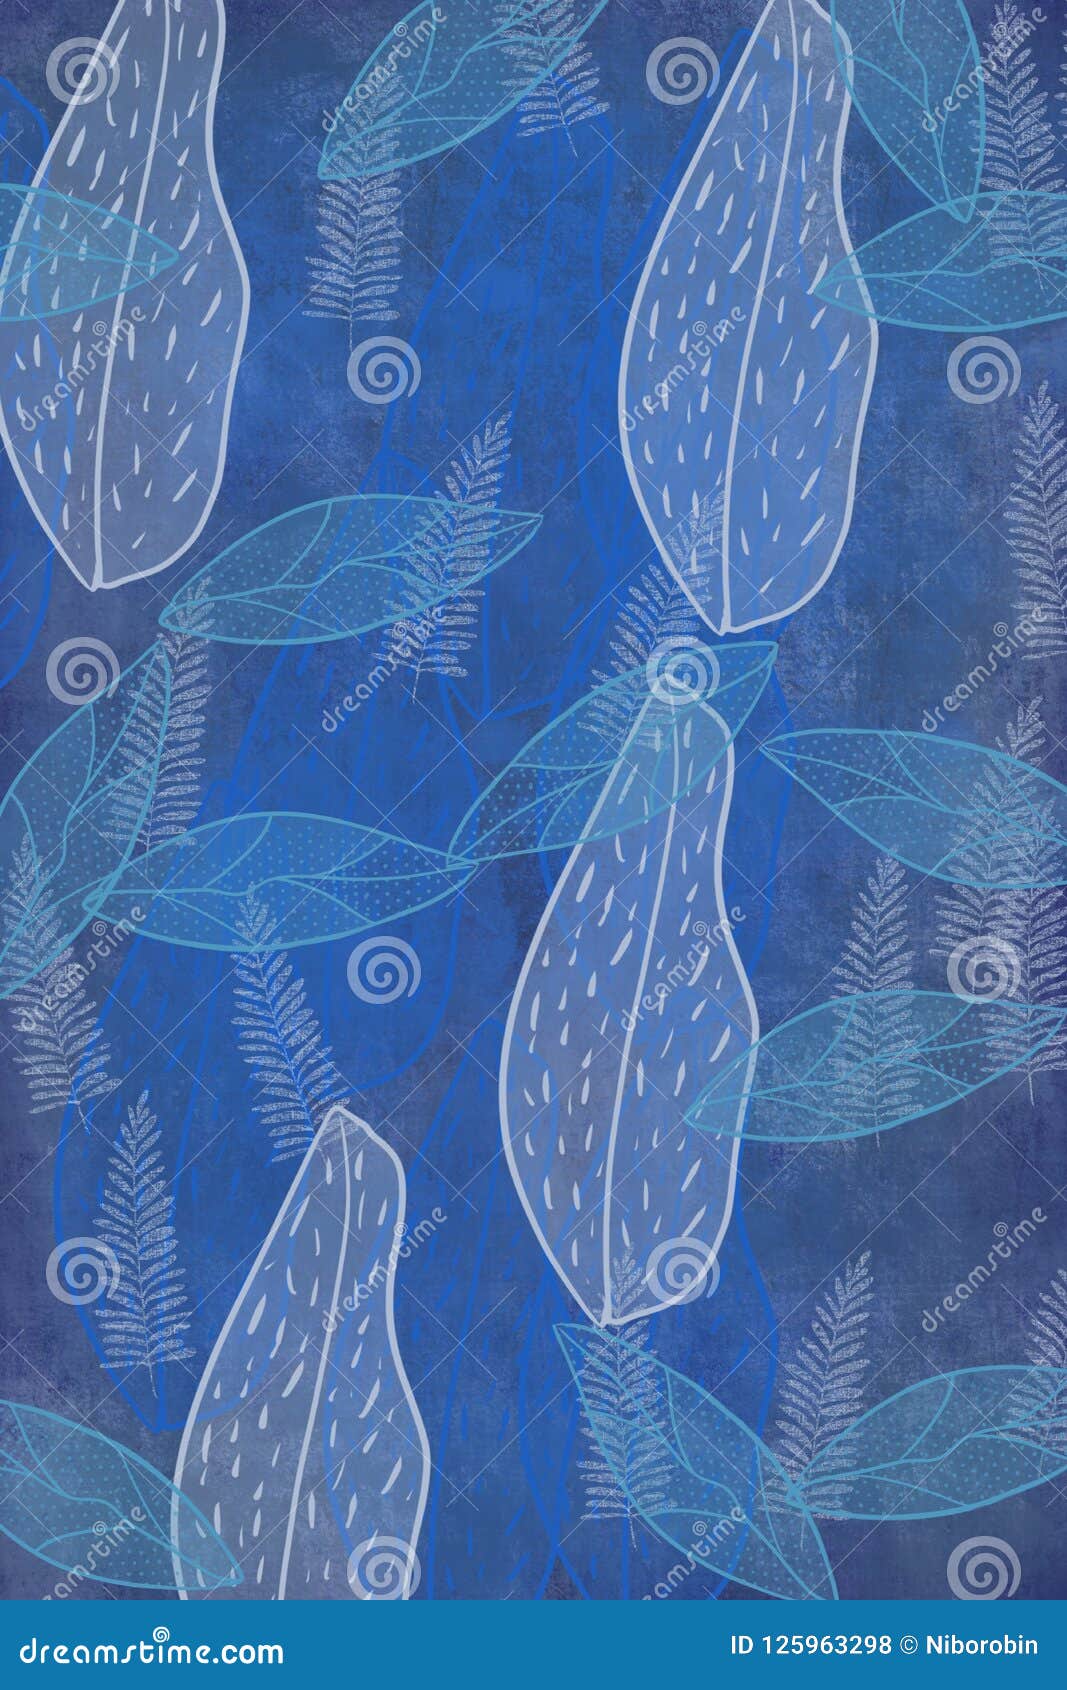 hand drawn bokeh fern and plant art dyed grunge background with japanese ink antiqued style background in blue jean and indigo